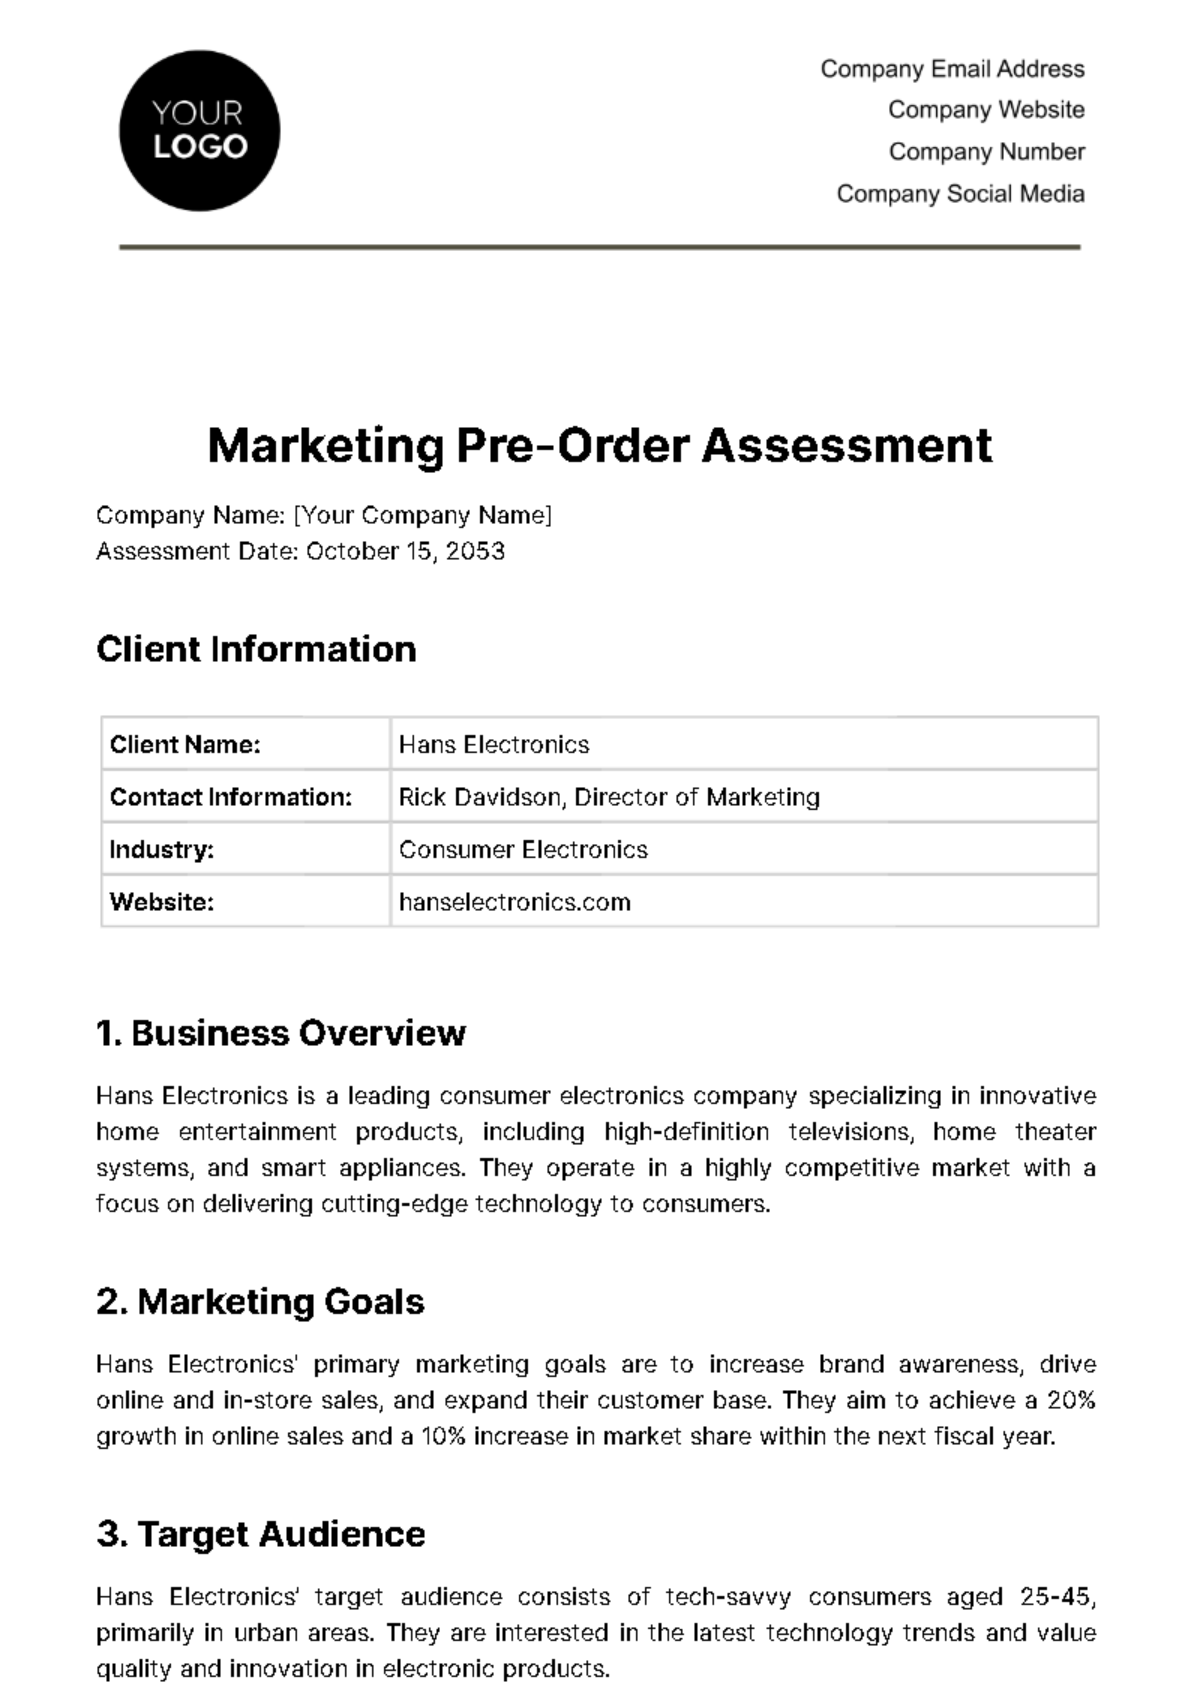 Free Marketing Pre-Order Assessment Template